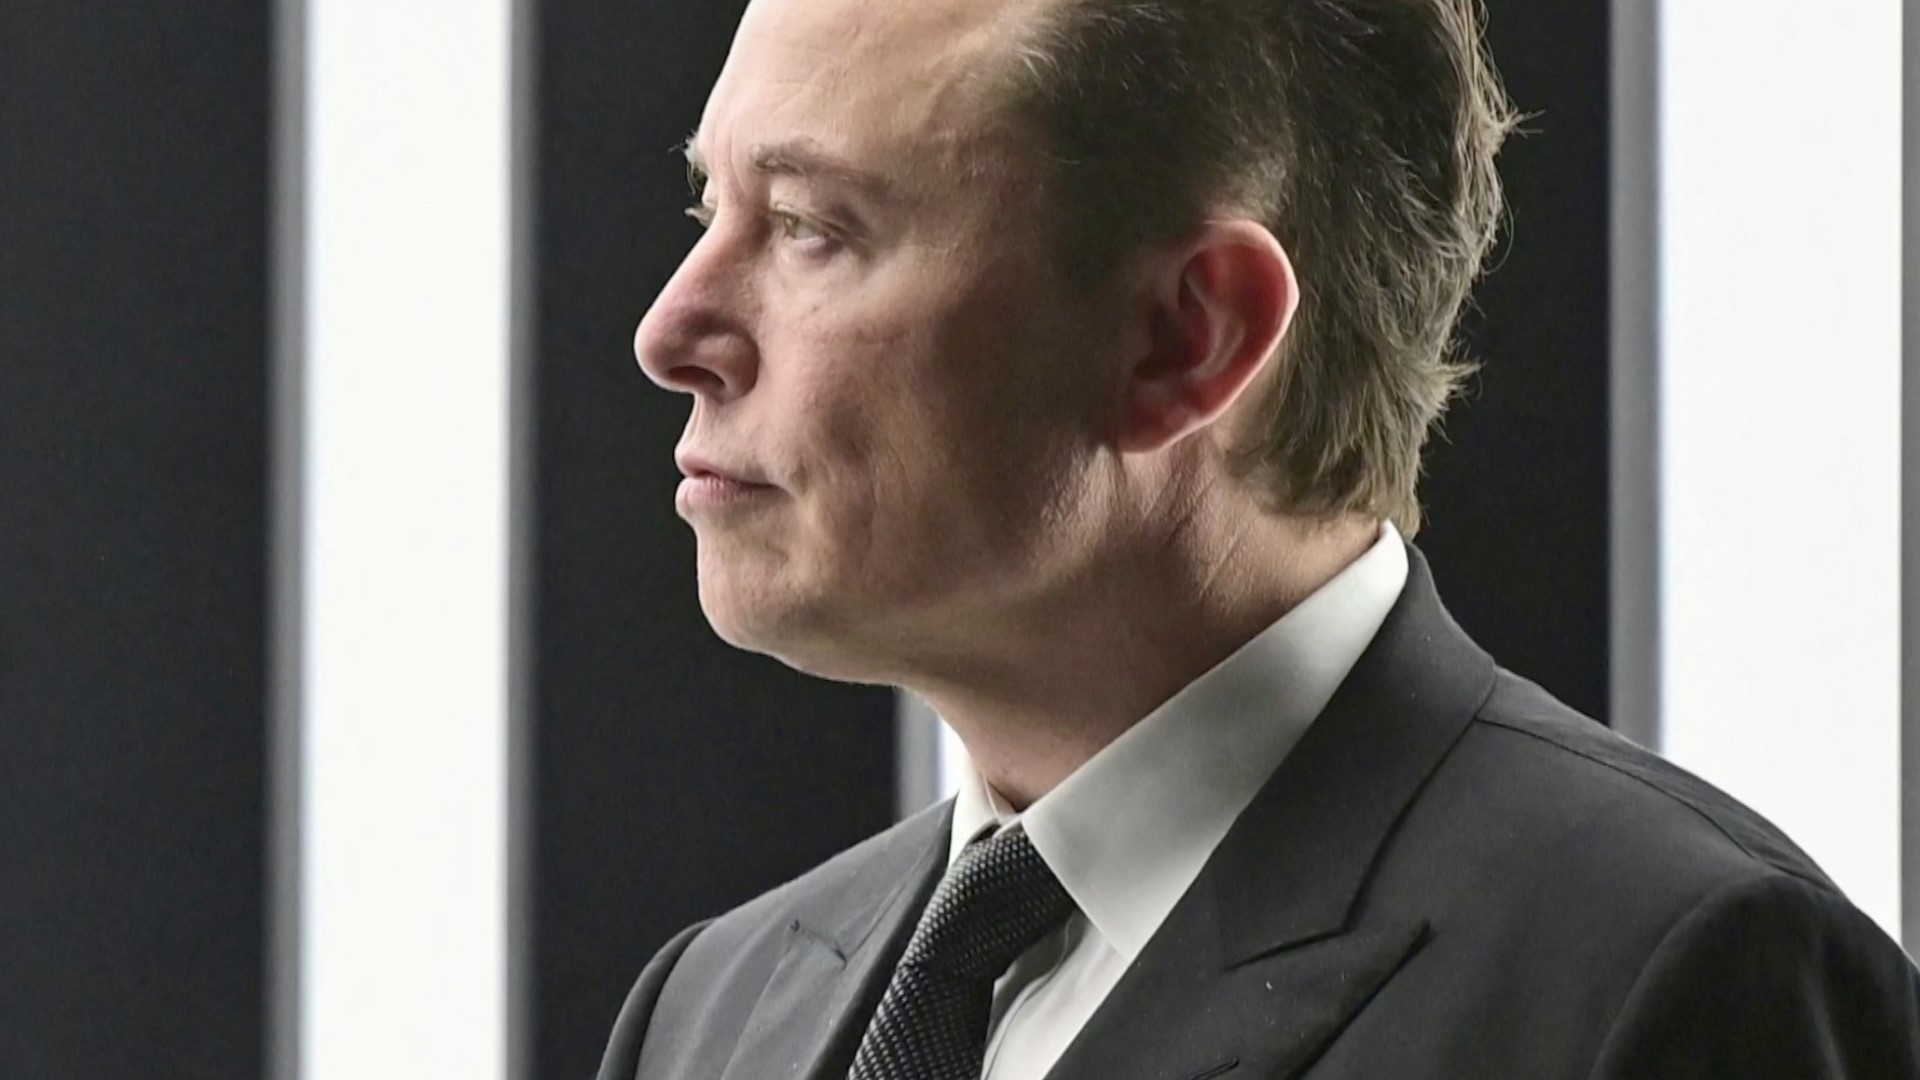 Elon Musk has agreed to buy Twitter for the original asking price of $44 billion. Veuer's Maria Mercedes Galuppo has the story.